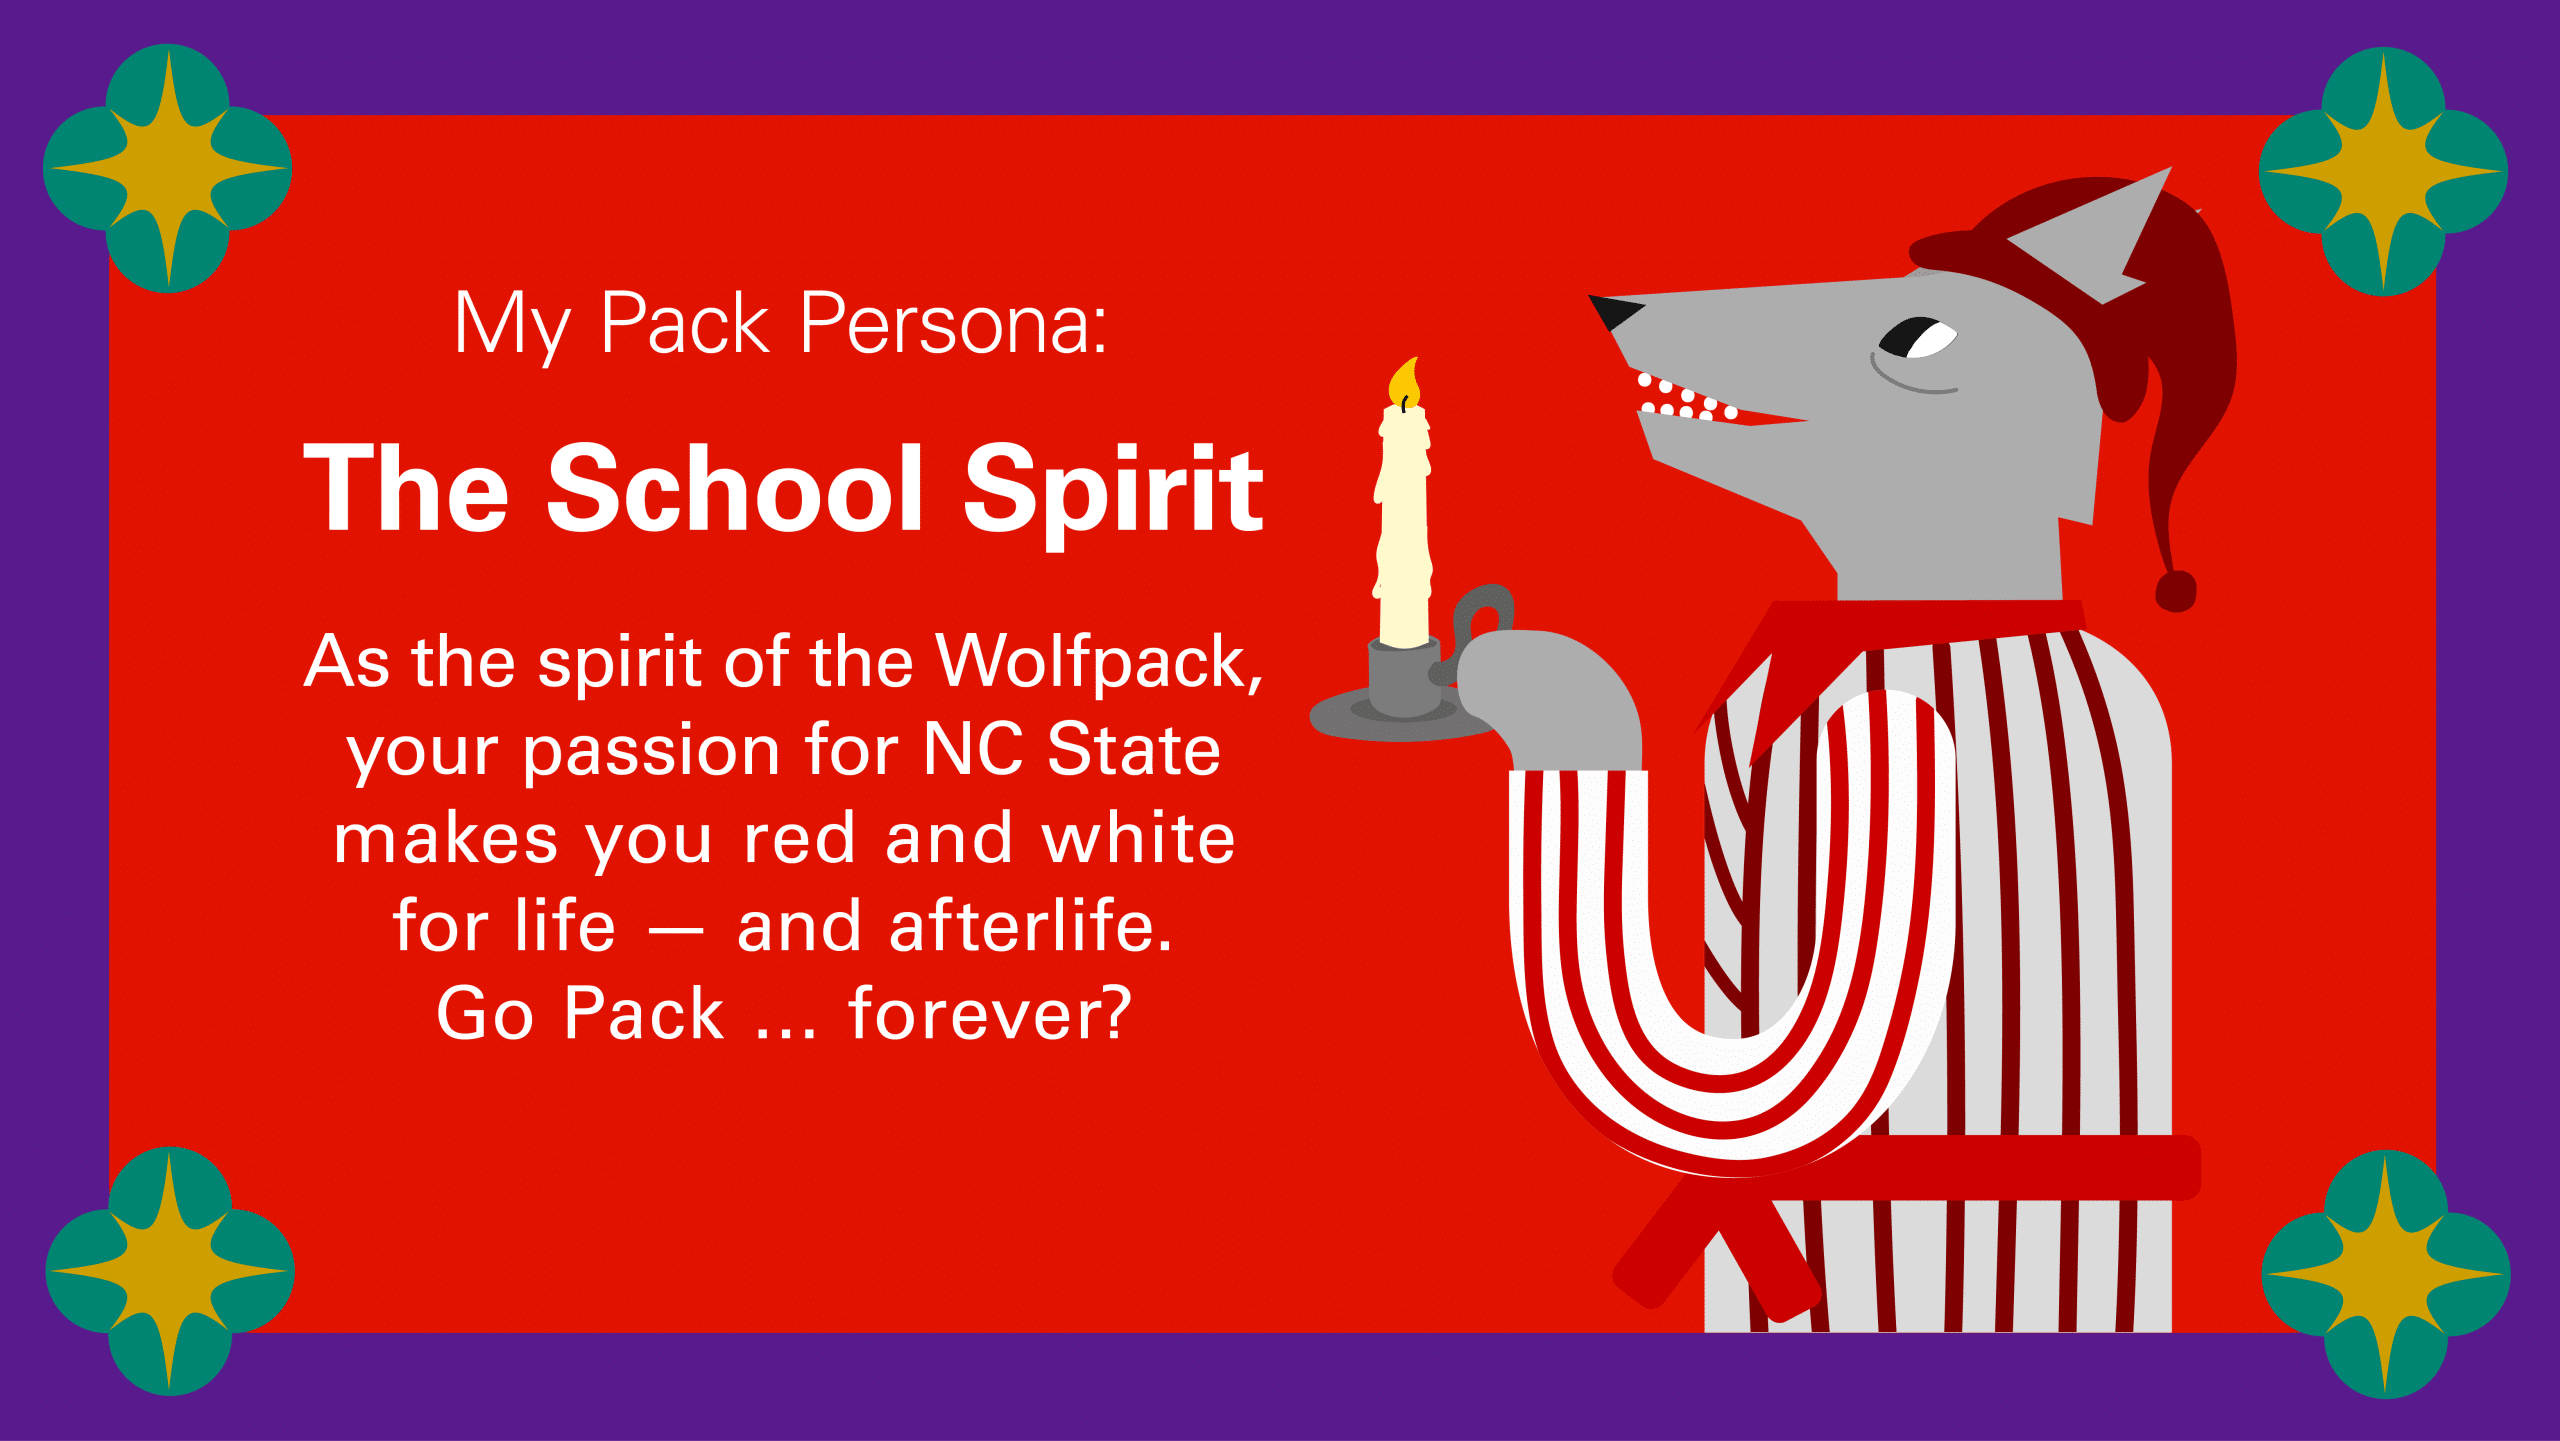 My Pack Persona: The School Spirit As the spirit of the Wolfpack, your passion for NC State makes you red and white for life — and afterlife. Go Pack … forever?